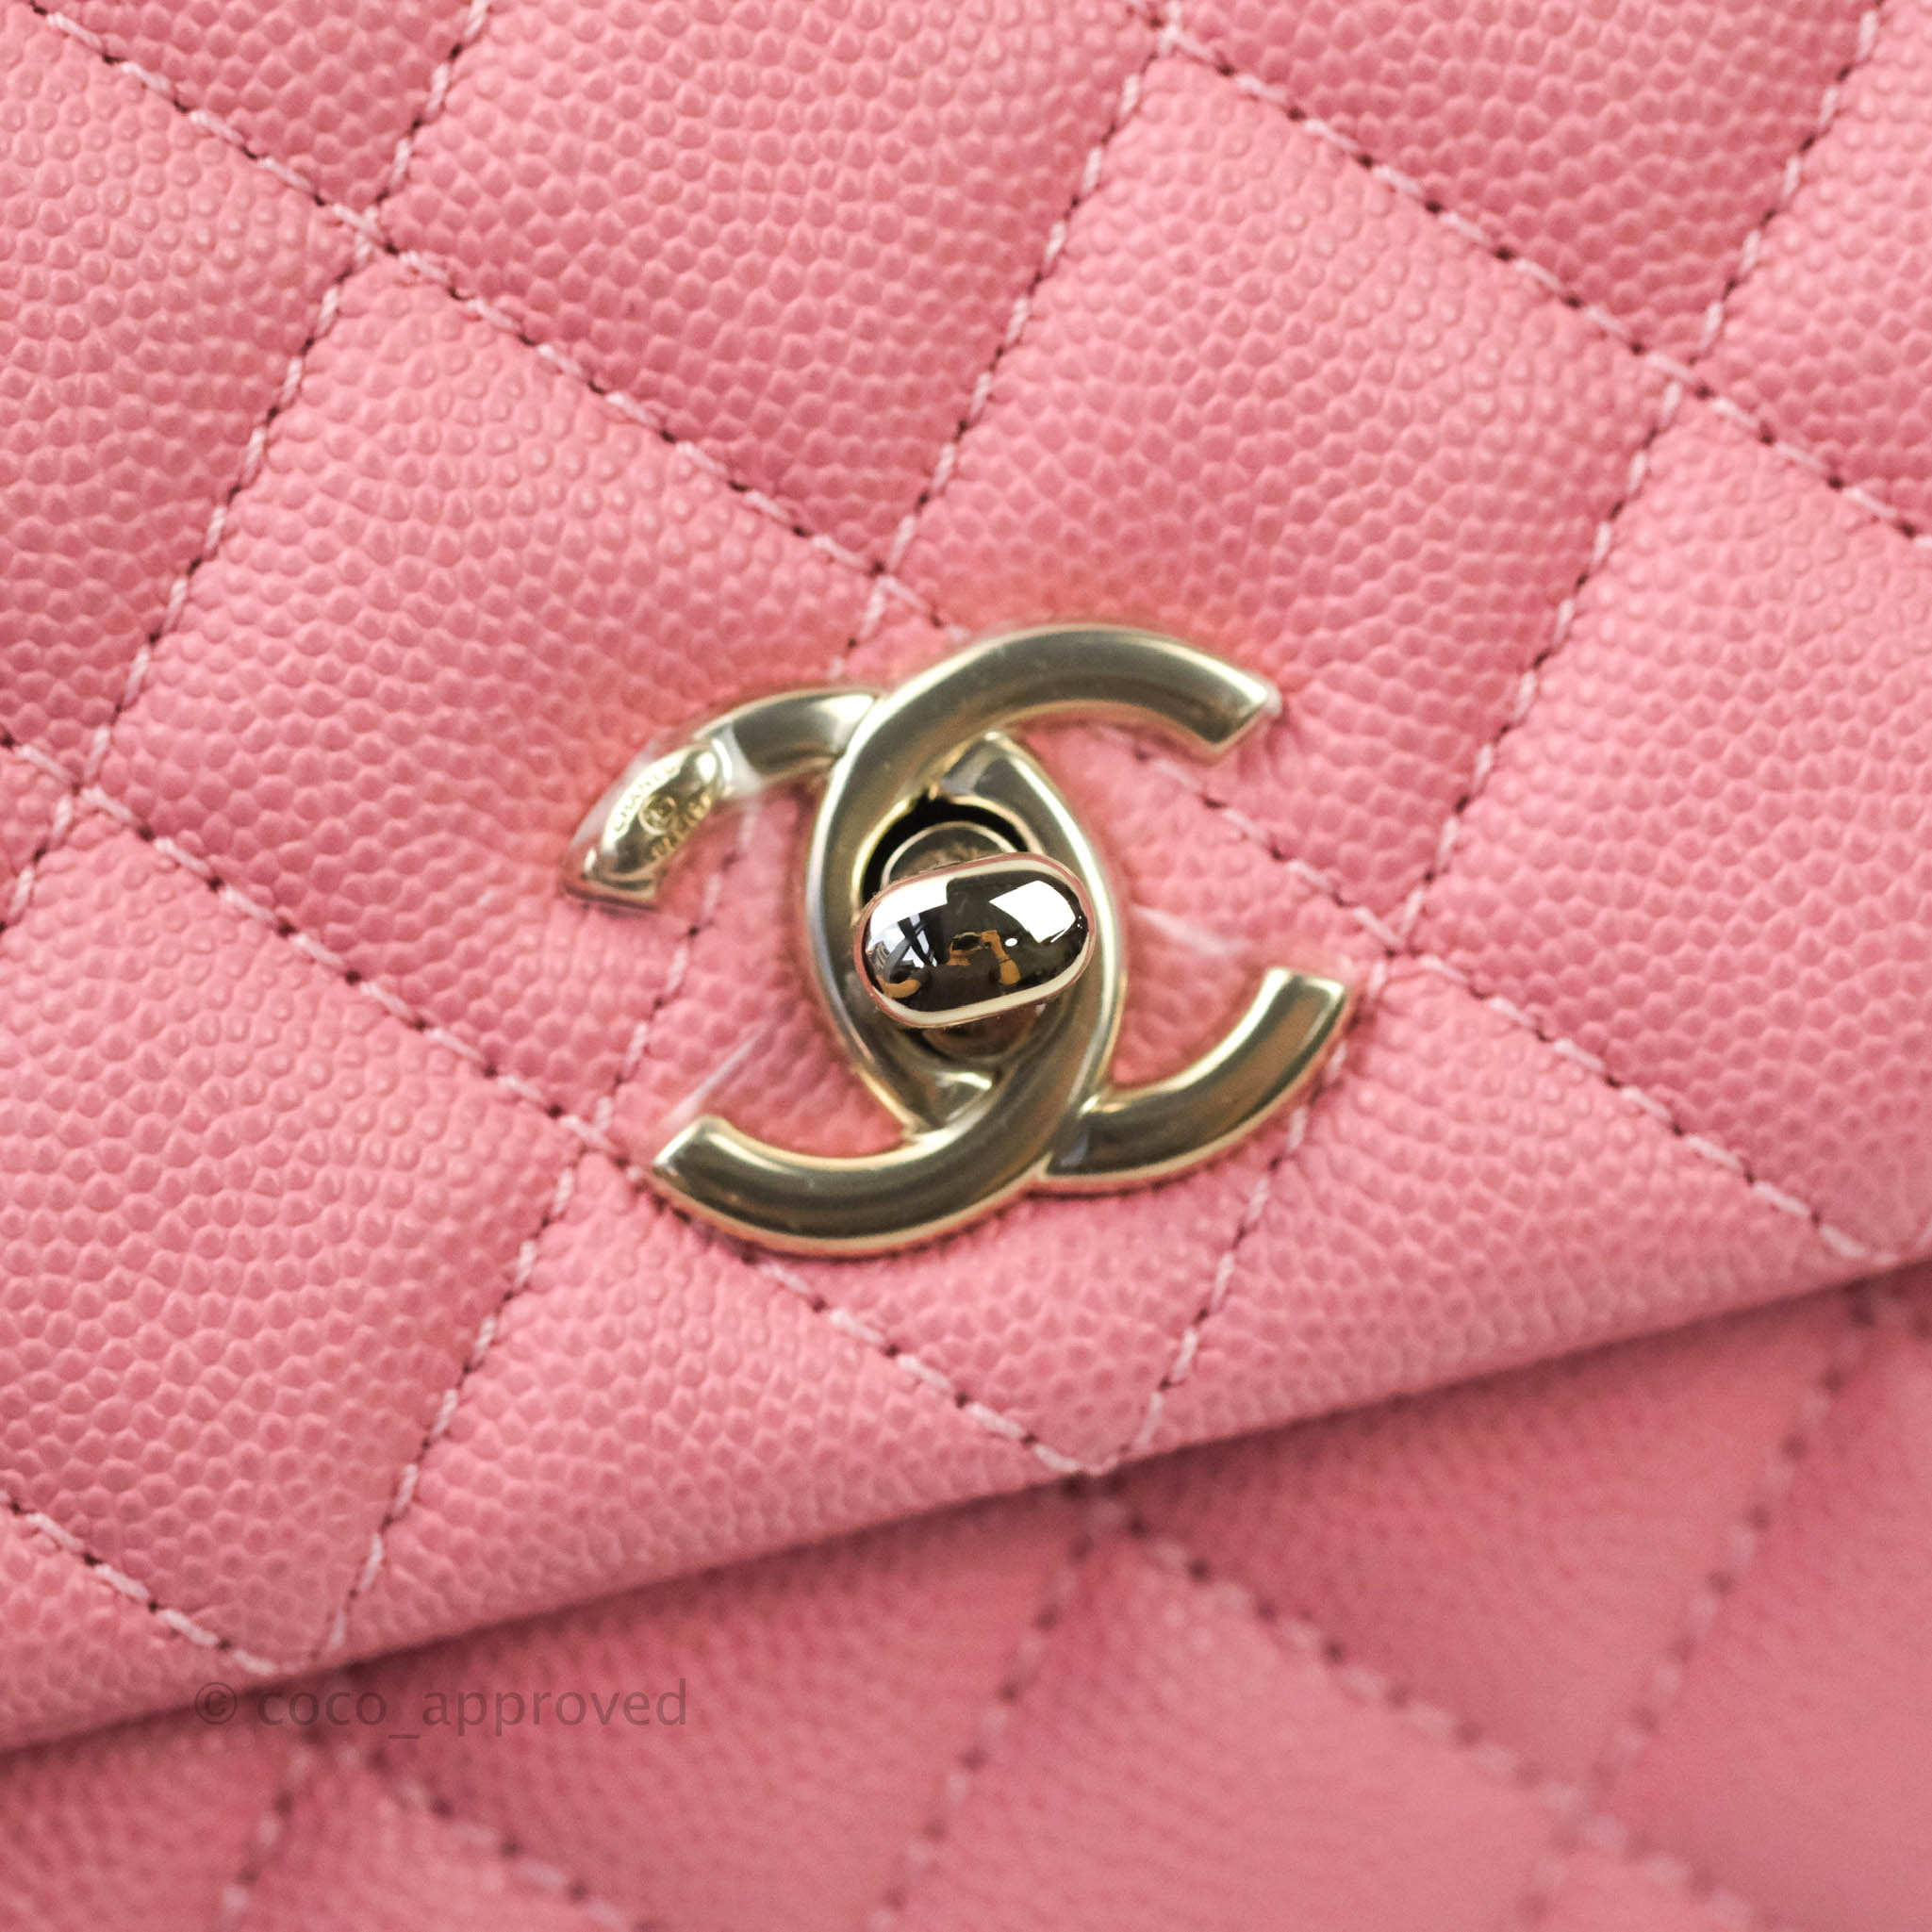 👜 on X: baby pink chanel bag  / X